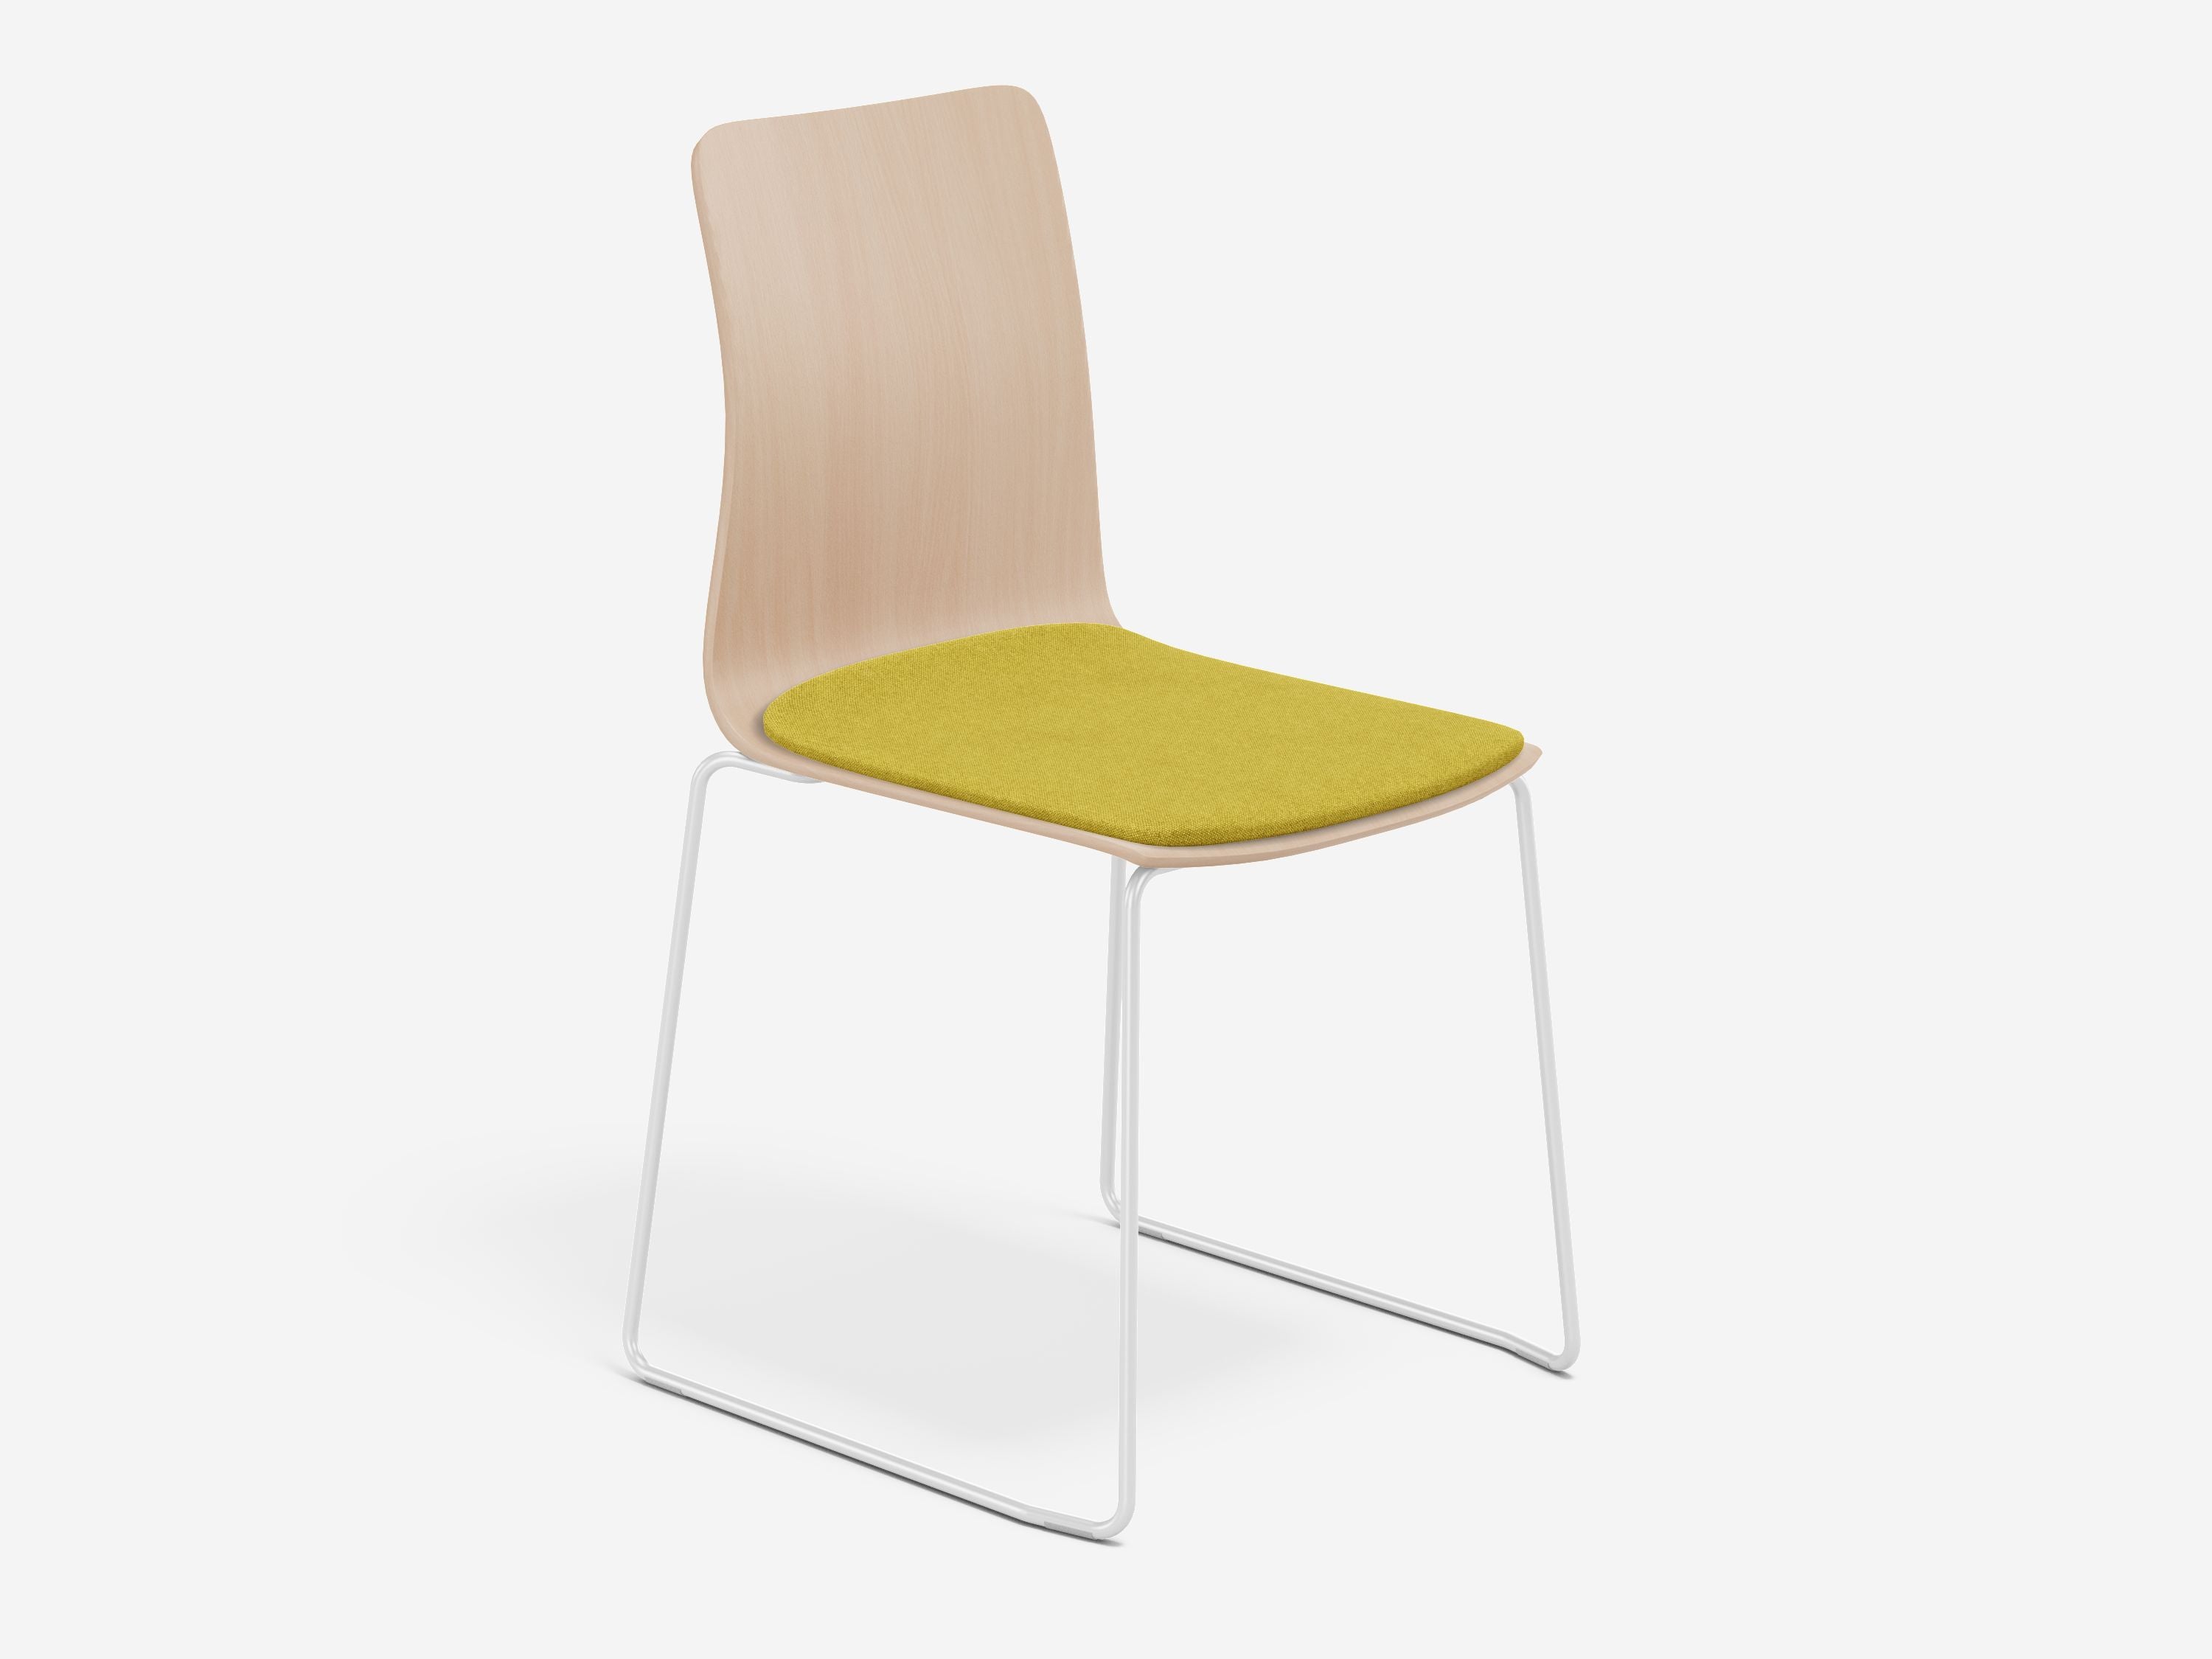 Linar Plus Wooden Chair with Cushion, Cantilever